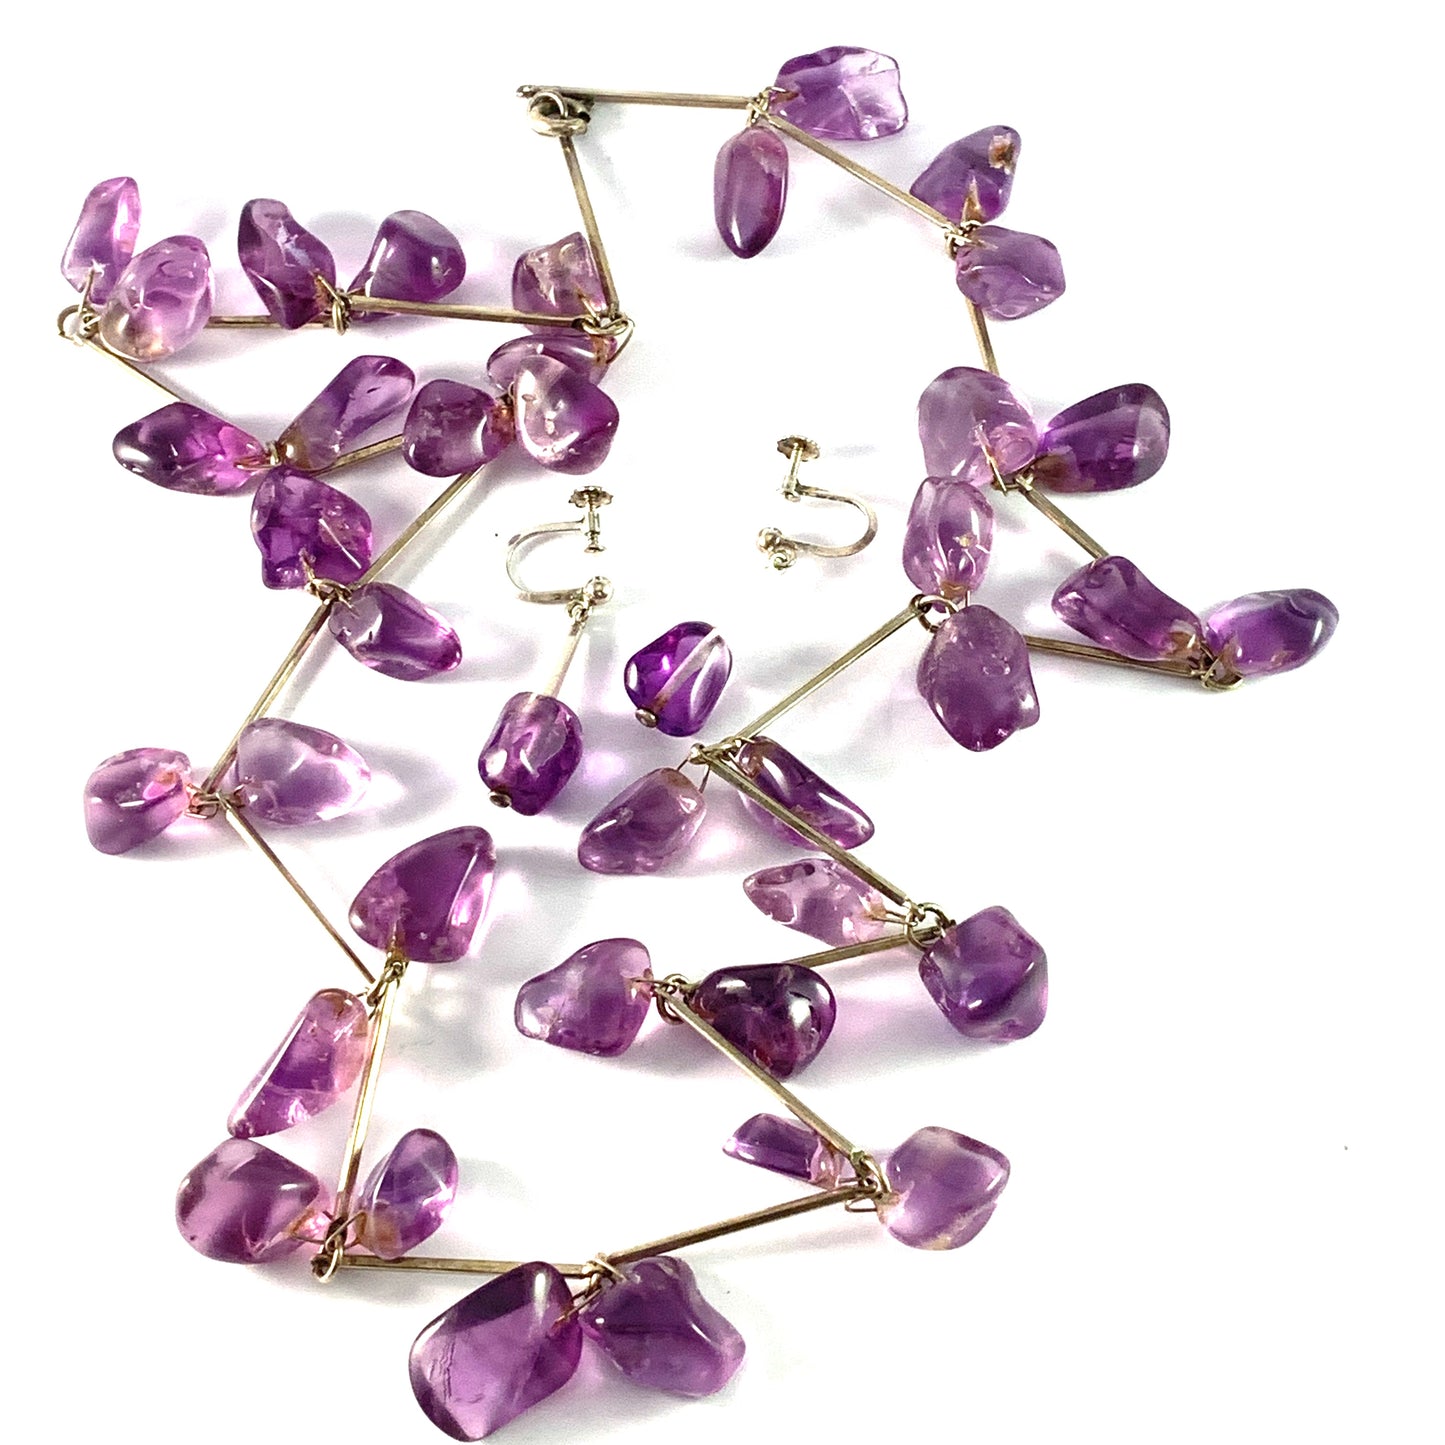 Vintage early 1940s WW2-Era Amethyst White Metal Silver Necklace and Earrings.